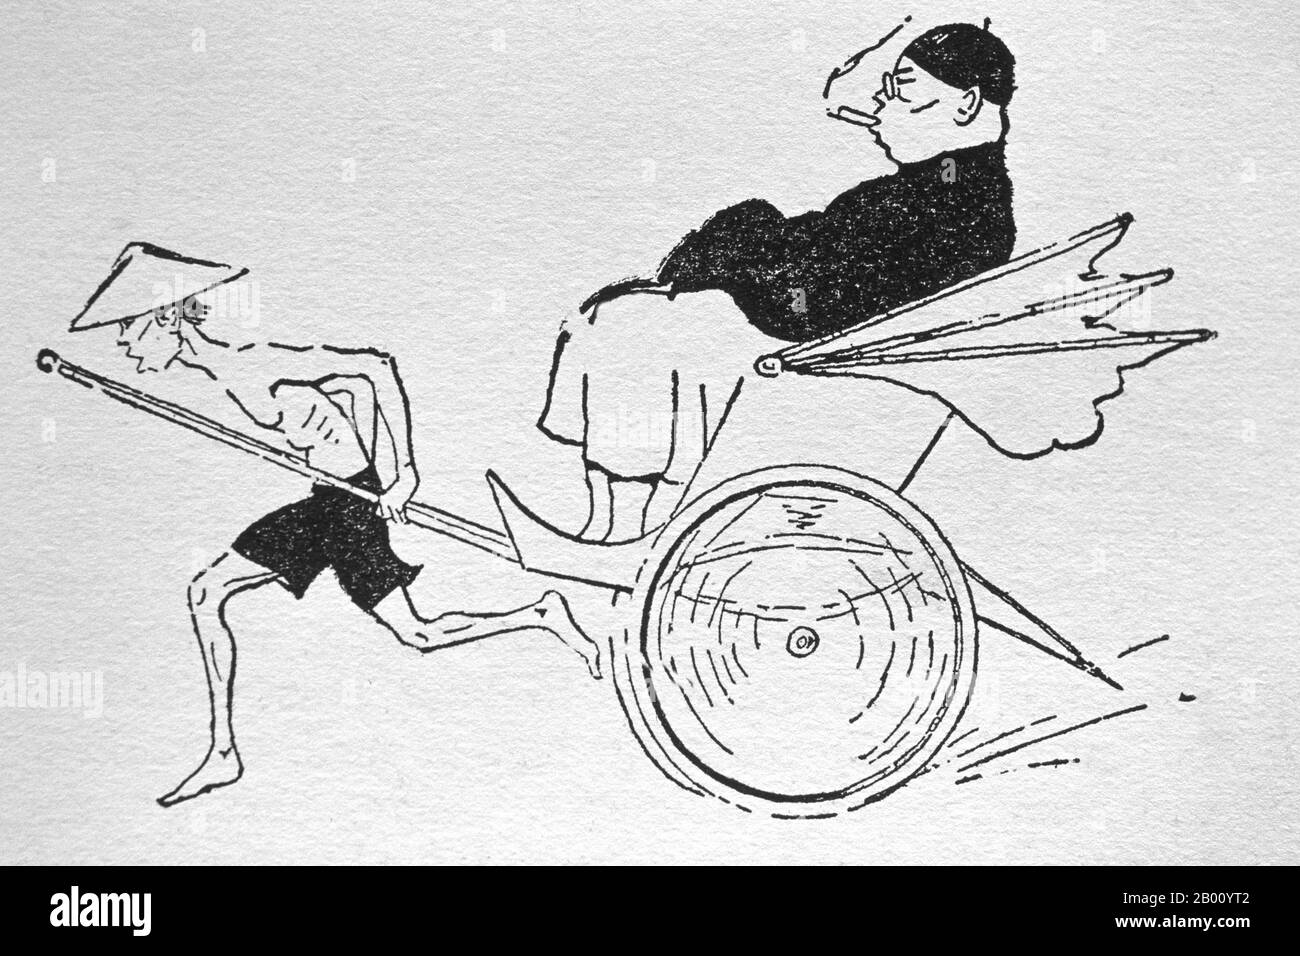 Vietnam: Drawing of a Hoa (Overseas Chinese) man being pulled in a rickshaw by a Viet coolie, Saigon, 1928.   Rickshaws (or rickshas) are a mode of human-powered transport: a runner draws a two-wheeled cart which seats one or two persons. Rickshaws are commonly made with bamboo. The word rickshaw came from Asia, where they were mainly used as means of transportation for the social elite. In recent times the use of rickshaws has been discouraged or outlawed in many countries due to concern for the welfare of rickshaw workers. Stock Photo